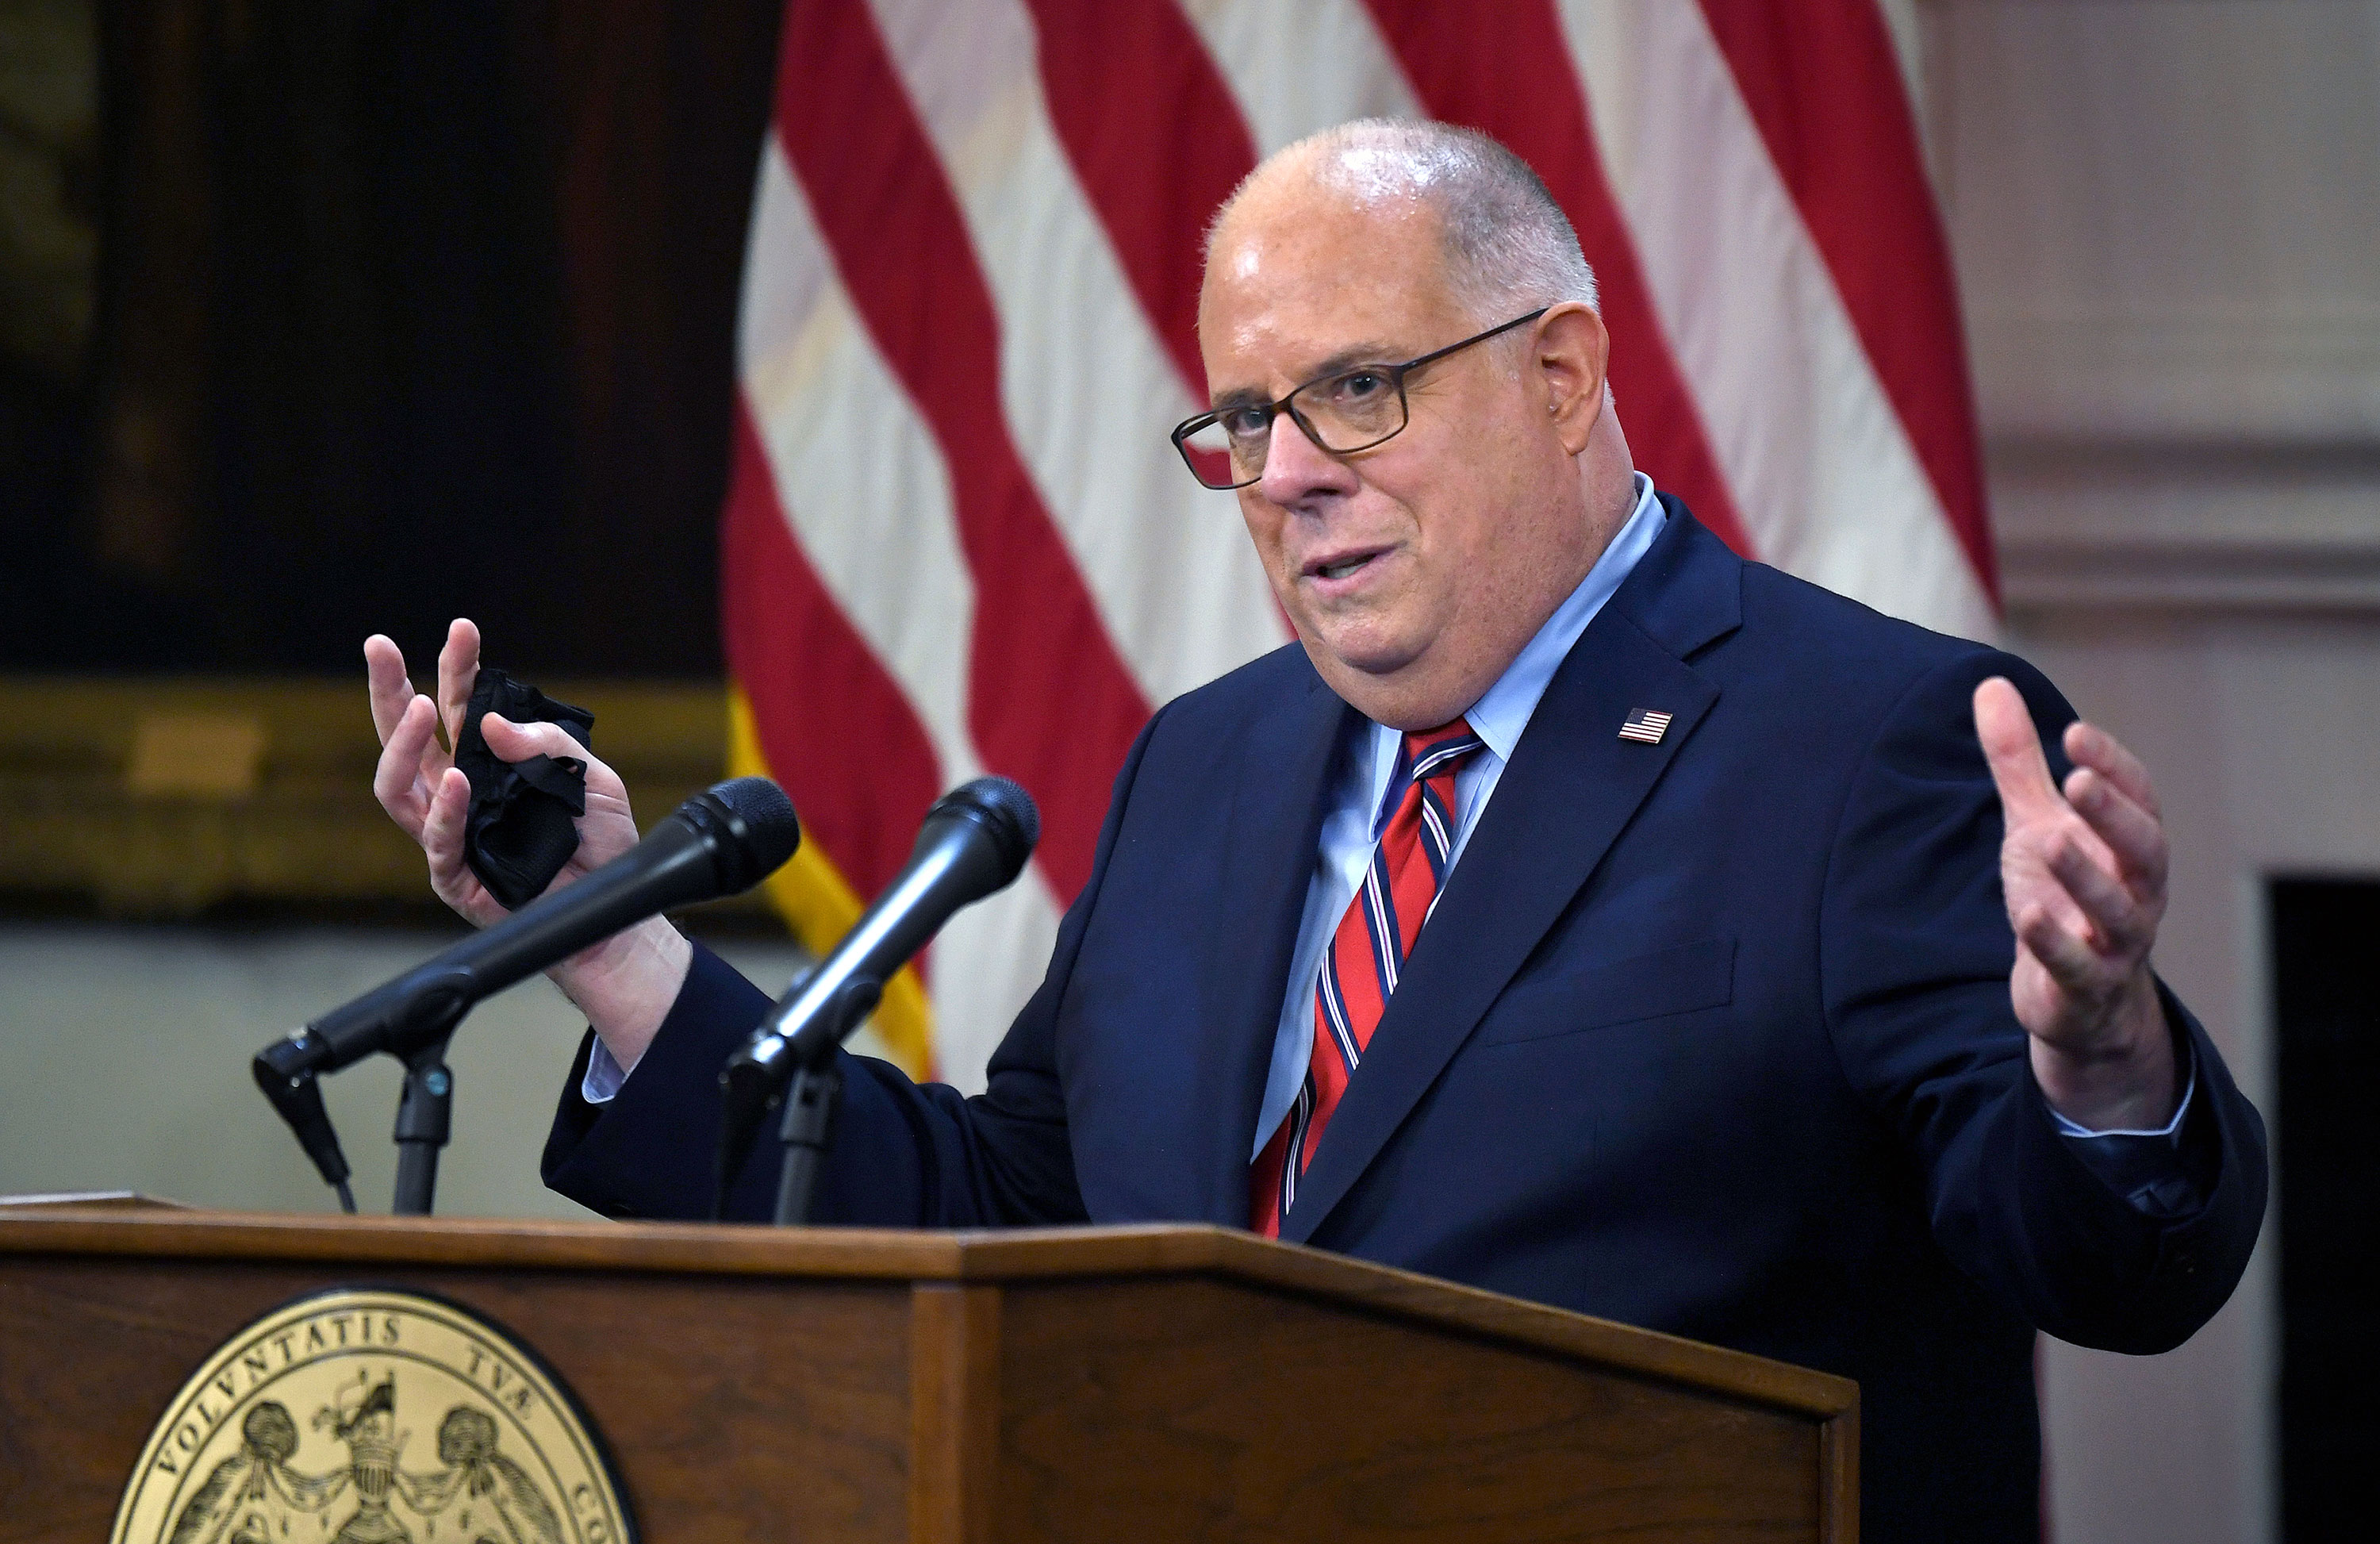 Maryland Gov. Larry Hogan speaks during a press conference on July 22 in Annapolis, Maryland.